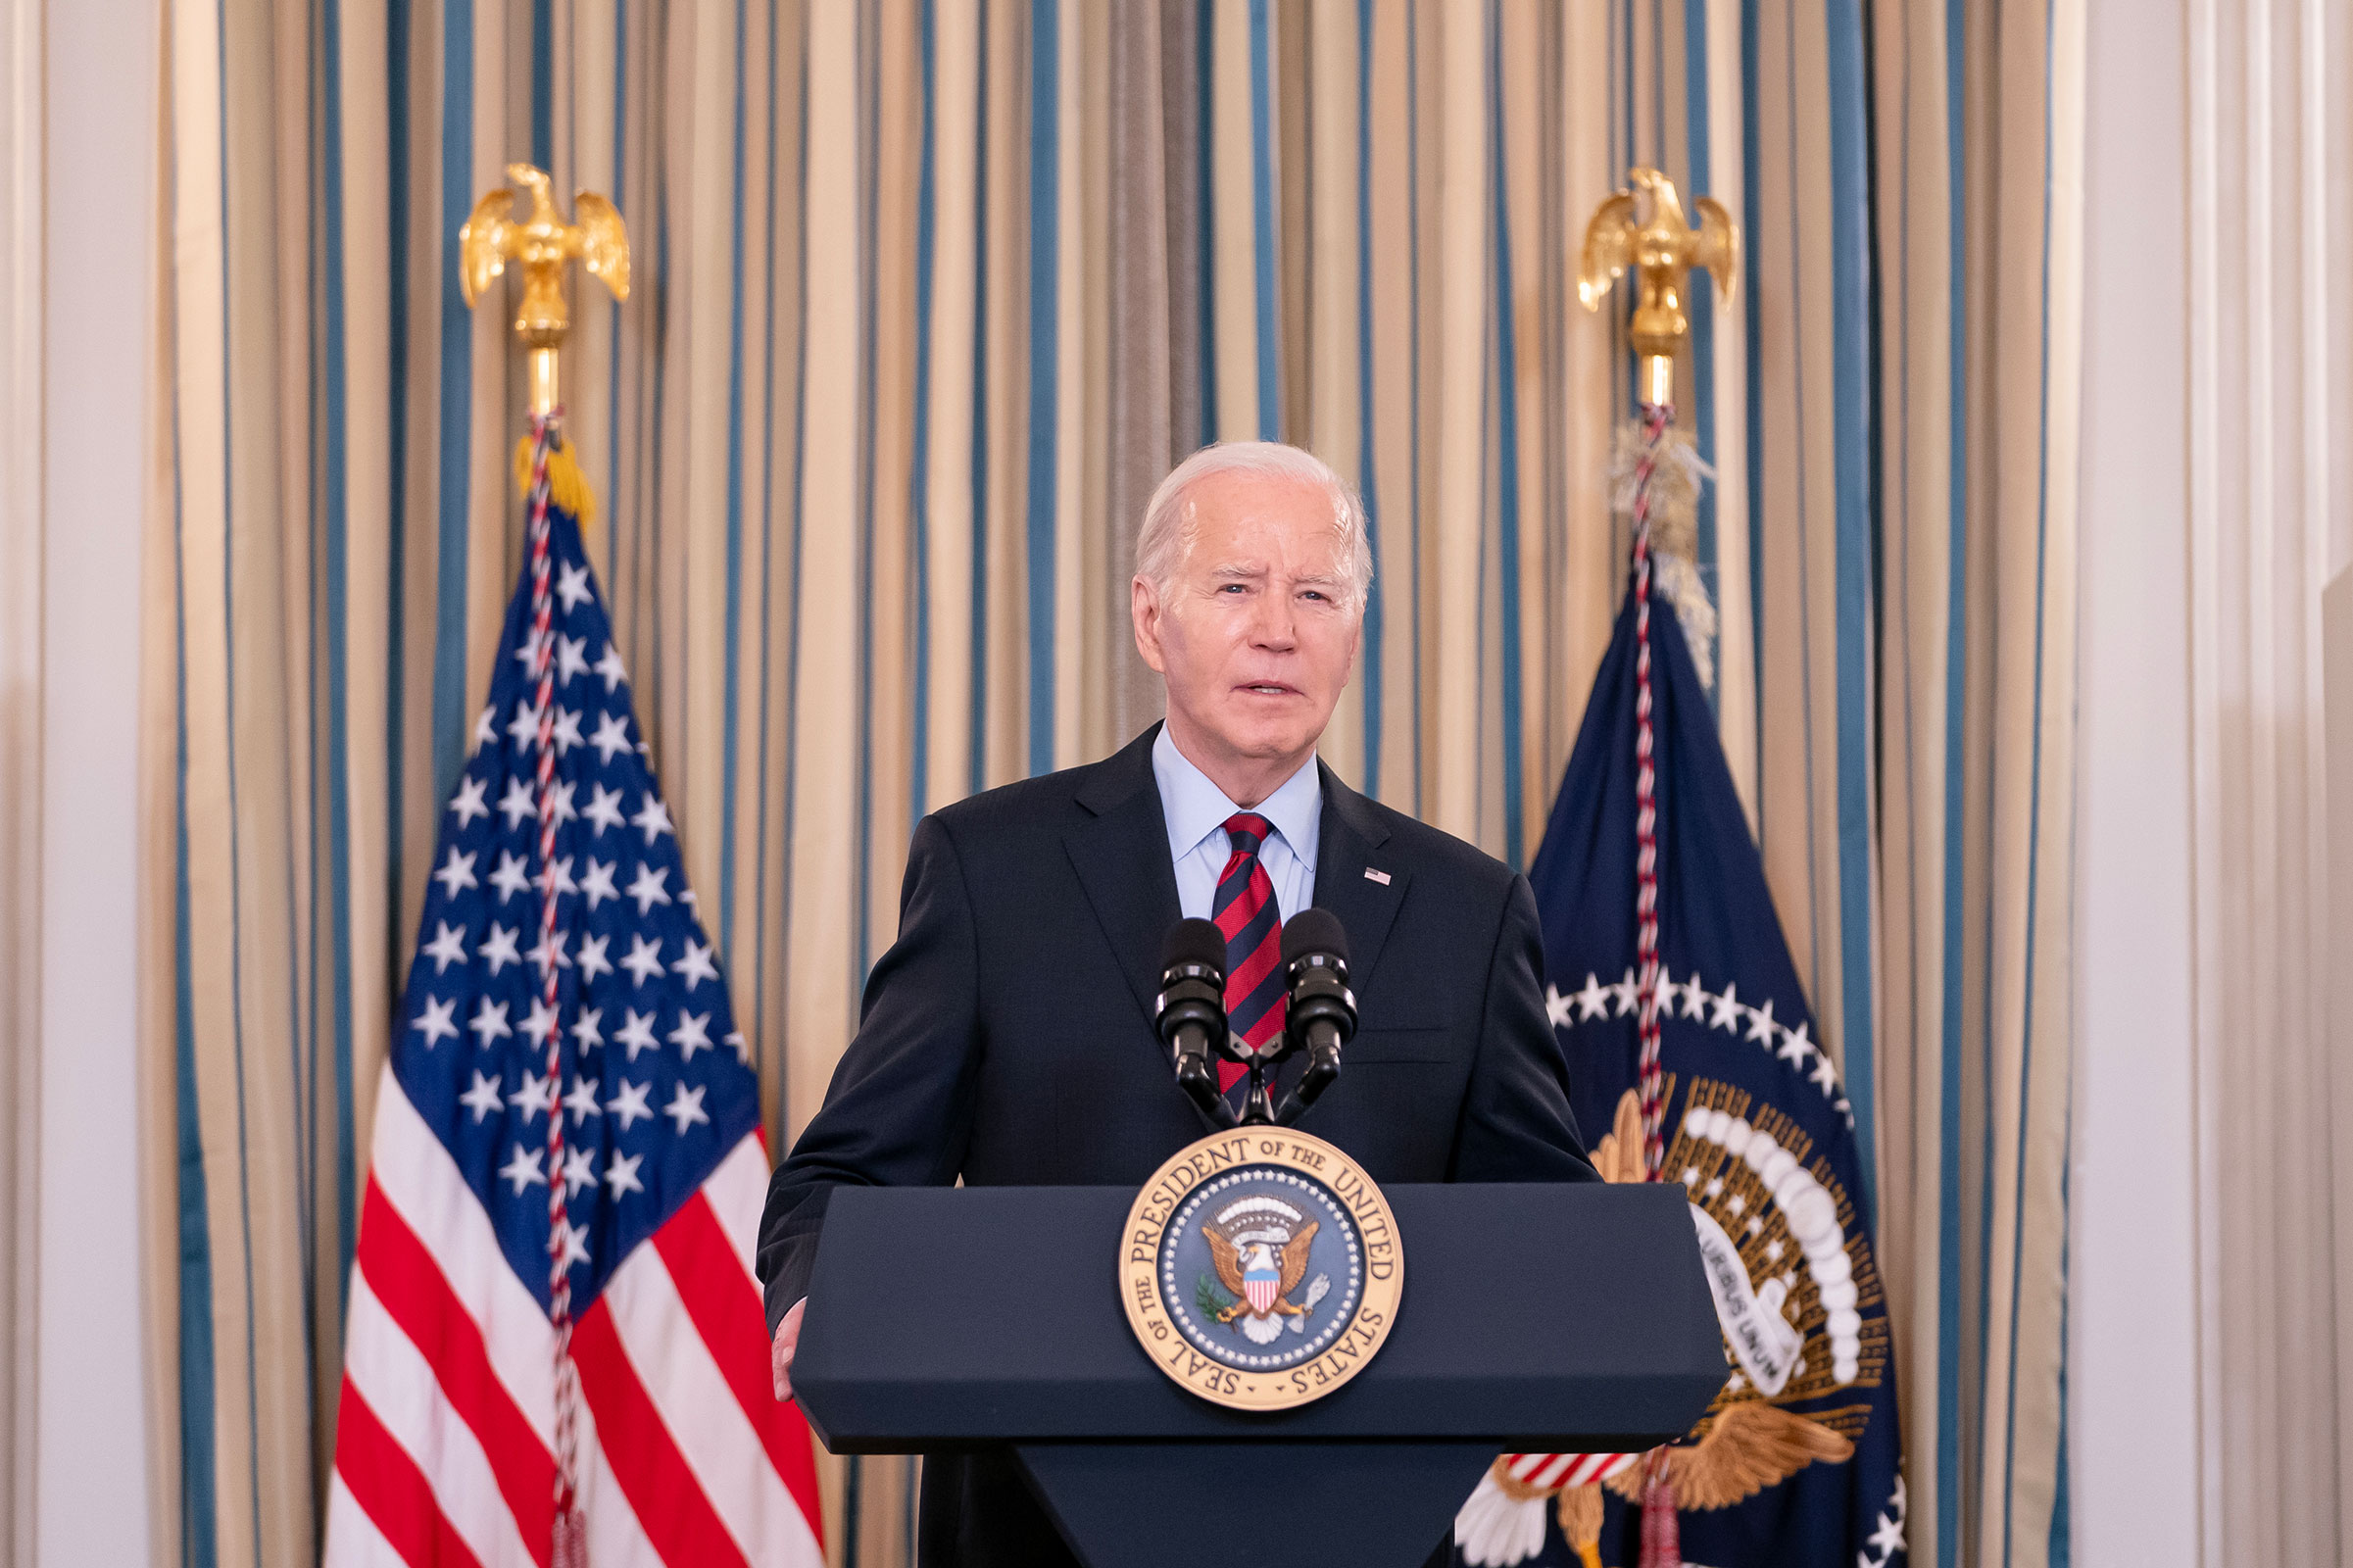 President Joe Biden speaks during a meeting with his Competition Council in the State Dining Room of the White House on March 5 in Washington, DC.